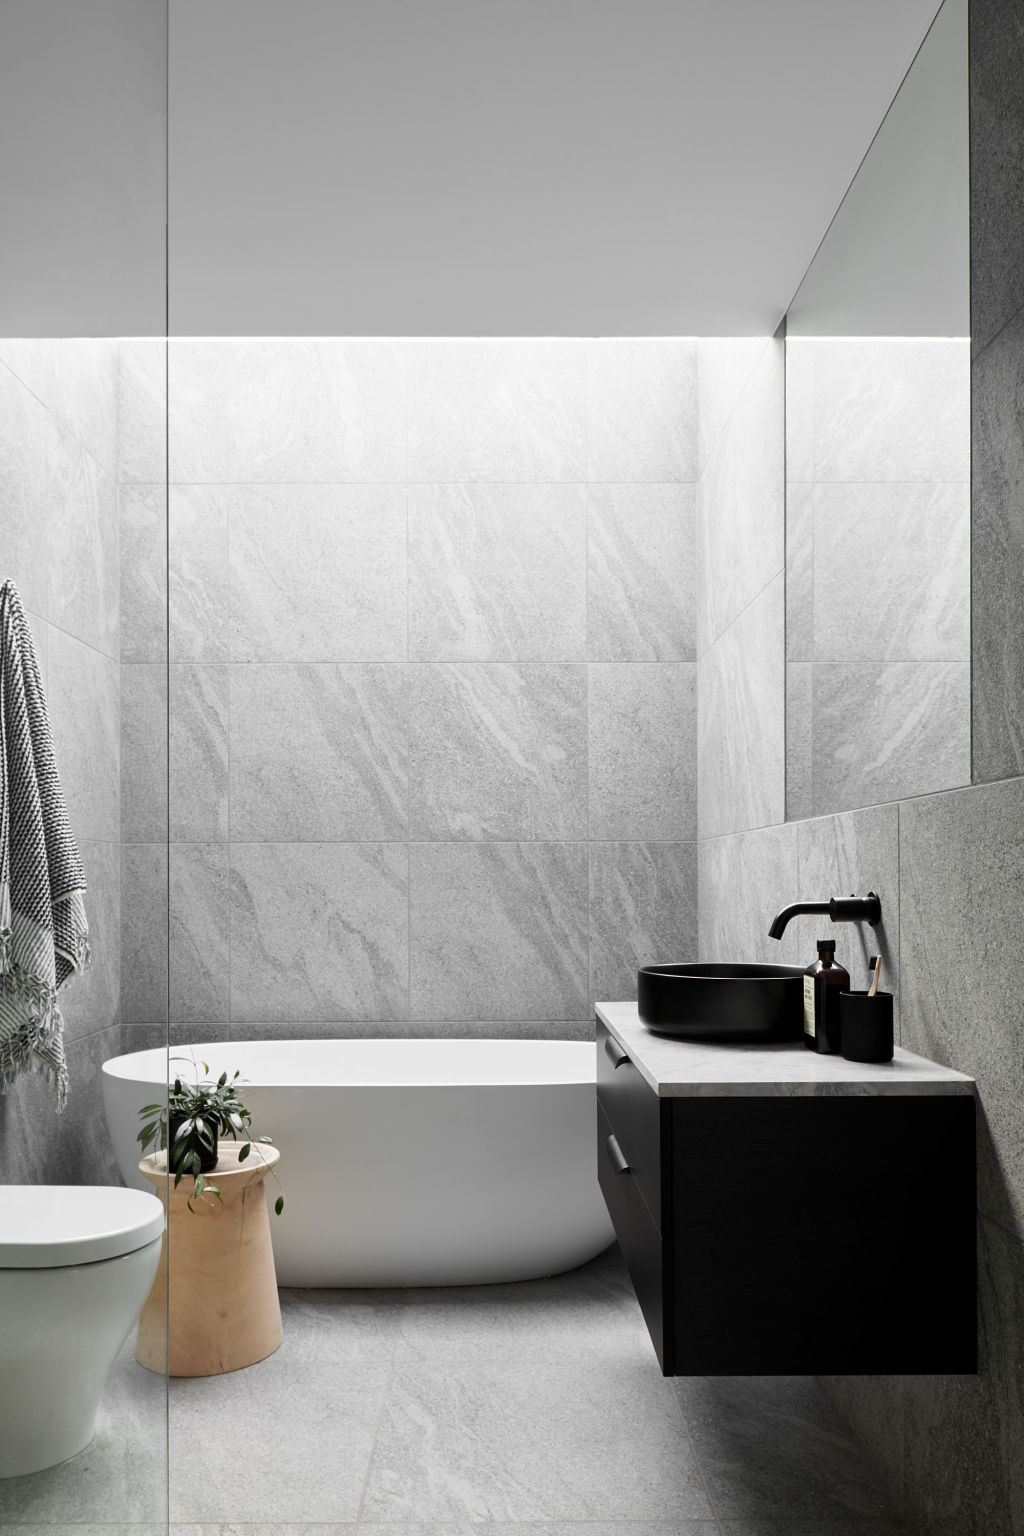 There's plenty of natural light in the bathroom thanks to the skylight. Photo: Simon Shiff